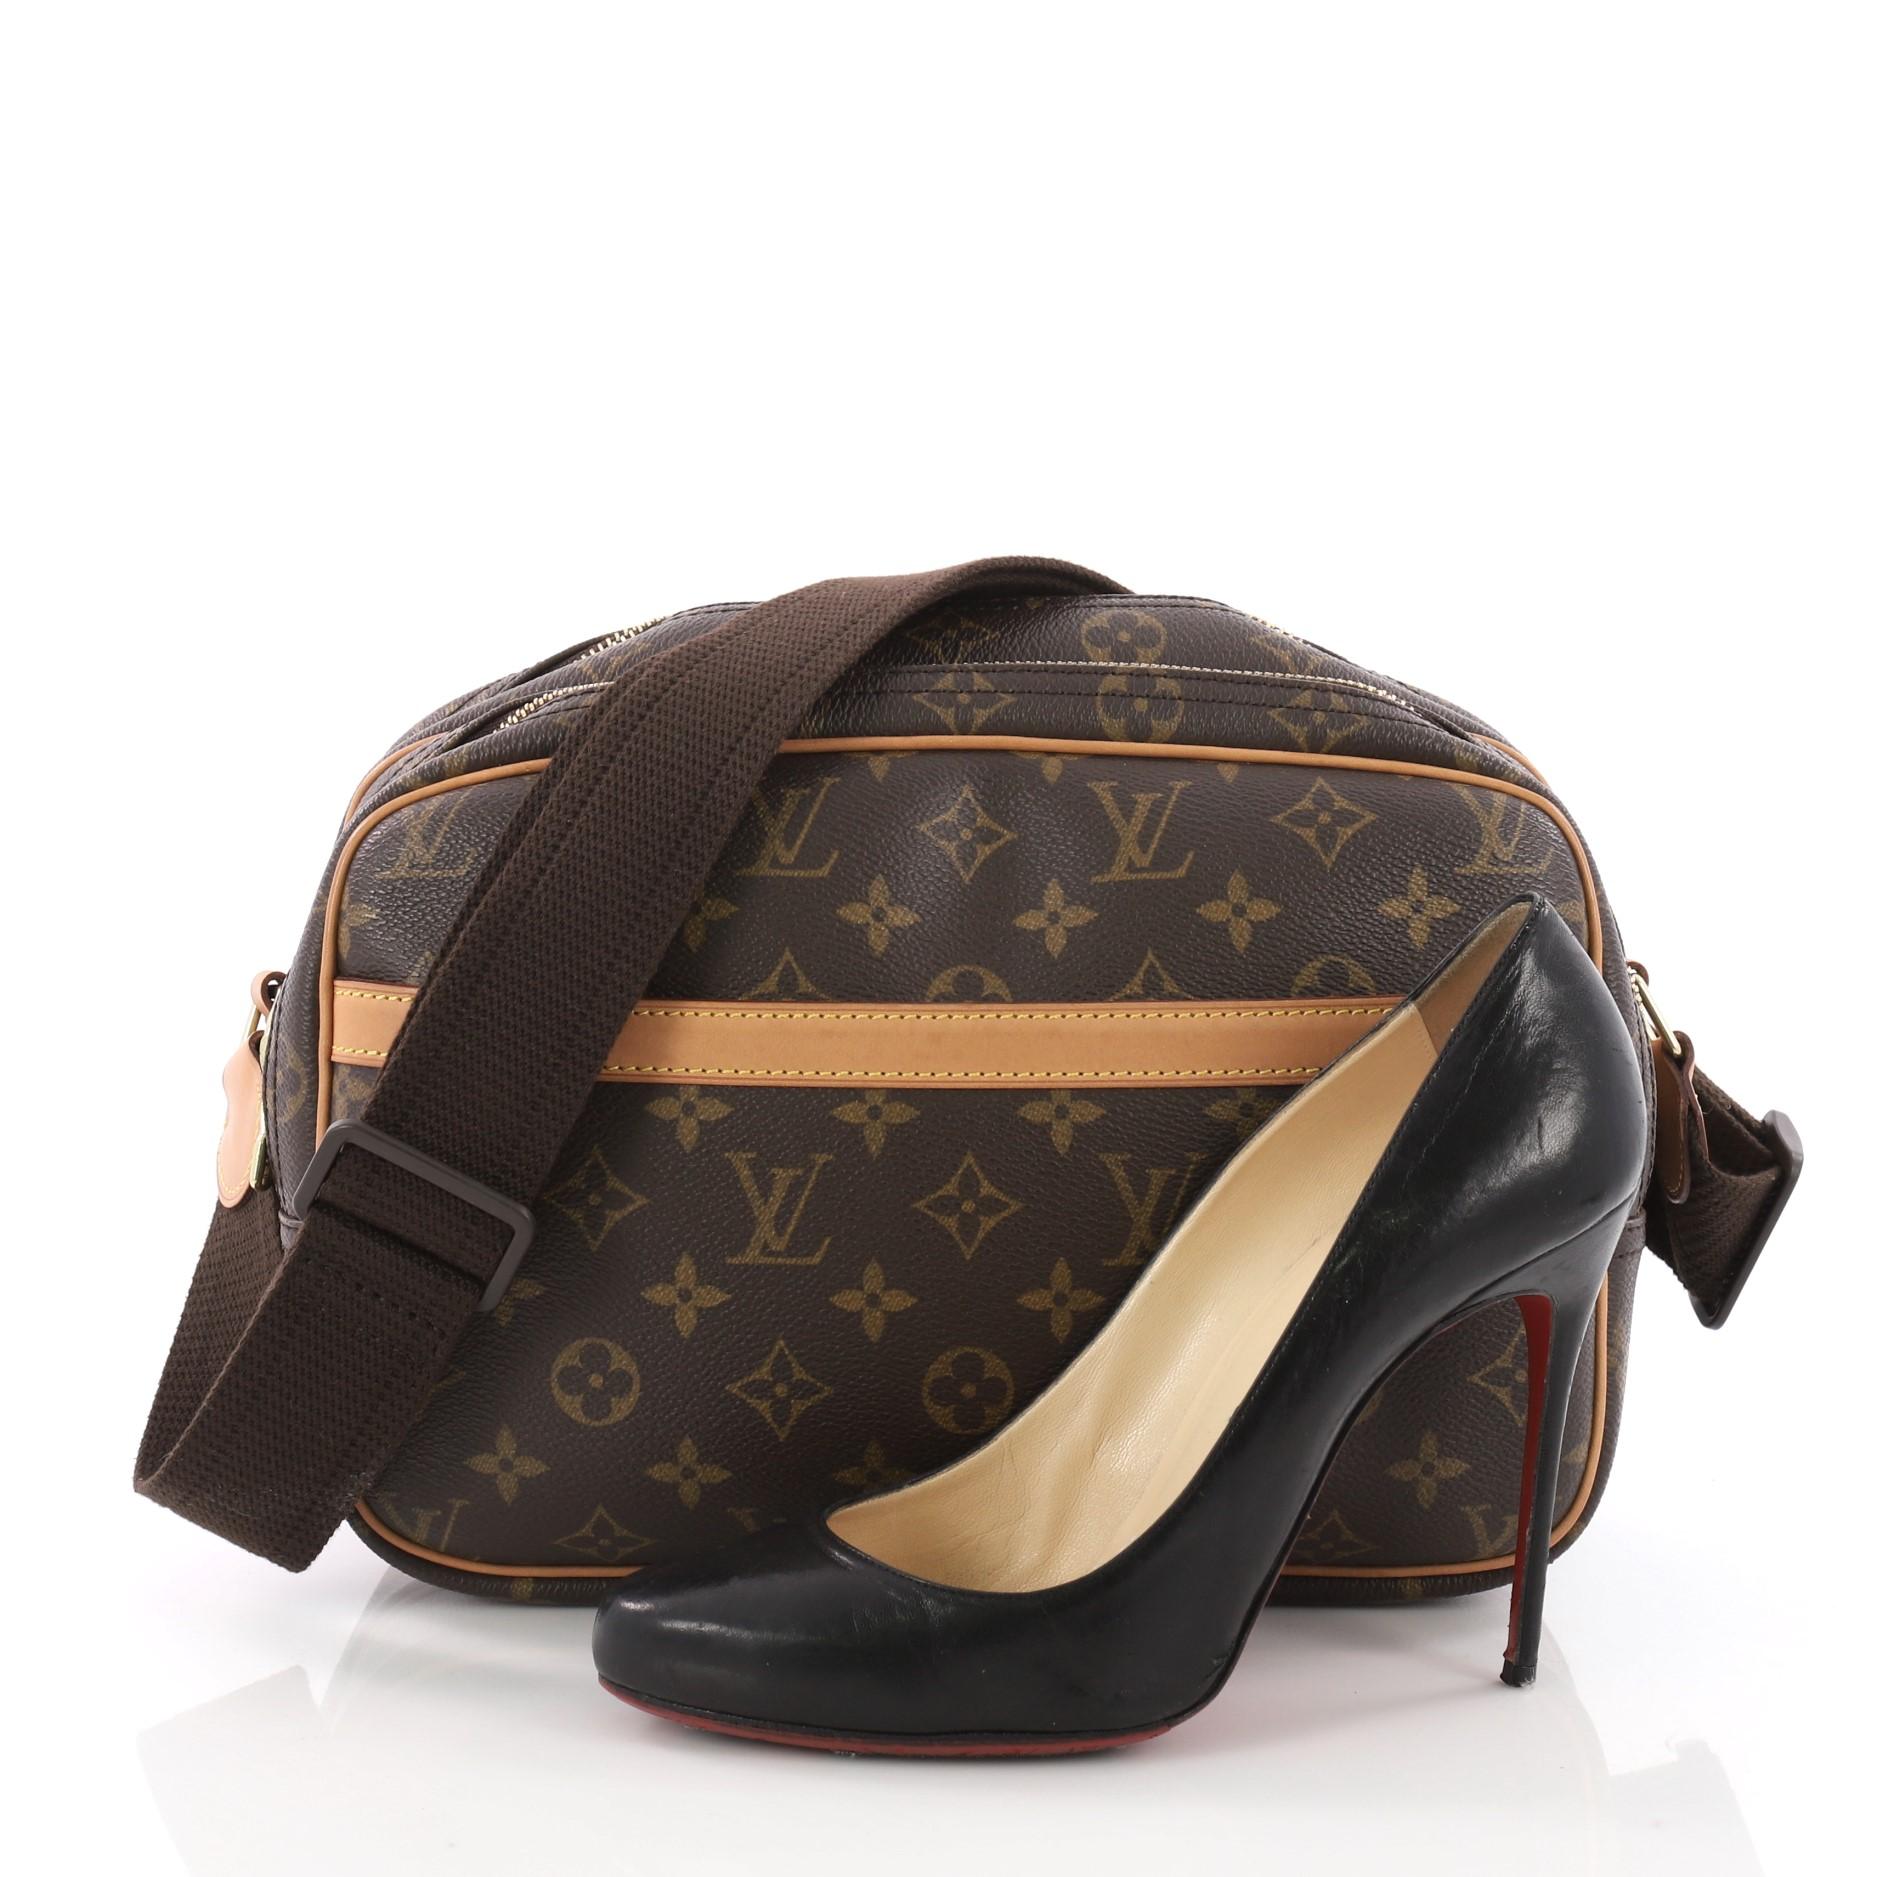 This authentic Louis Vuitton Reporter Bag Monogram Canvas PM is the ideal messenger bag for any fashionista. Crafted in brown monogram coated canvas, this bag features an adjustable wide nylon shoulder strap, vachetta leather trims and gold-tone